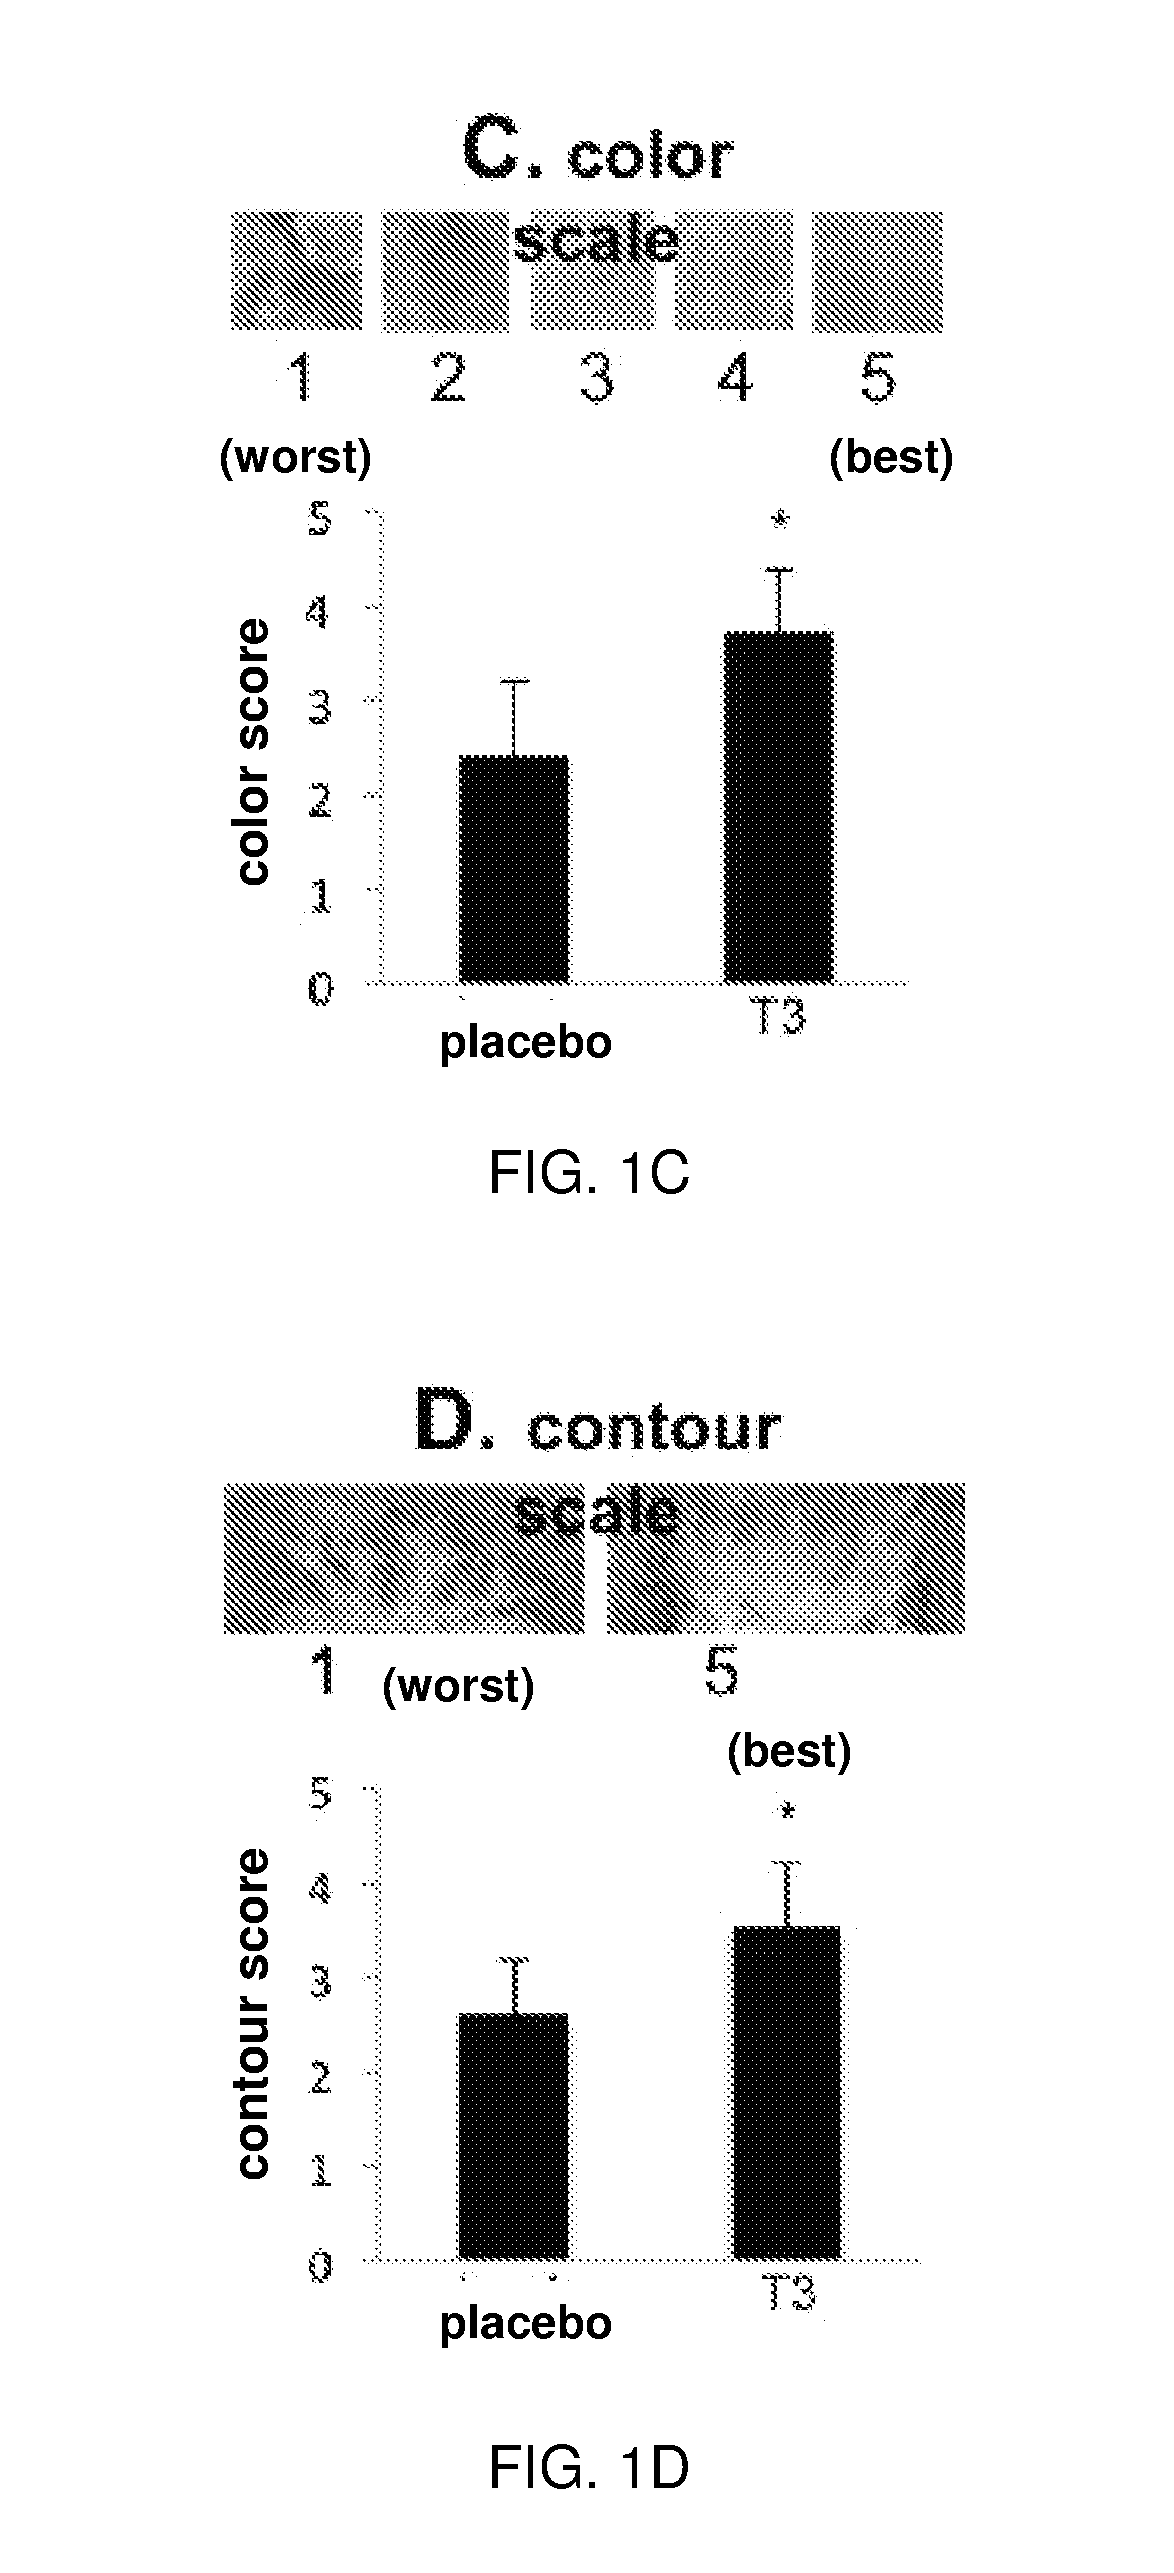 Methods for Treating Burn and Scar Injury using Tocotrienol Compositions